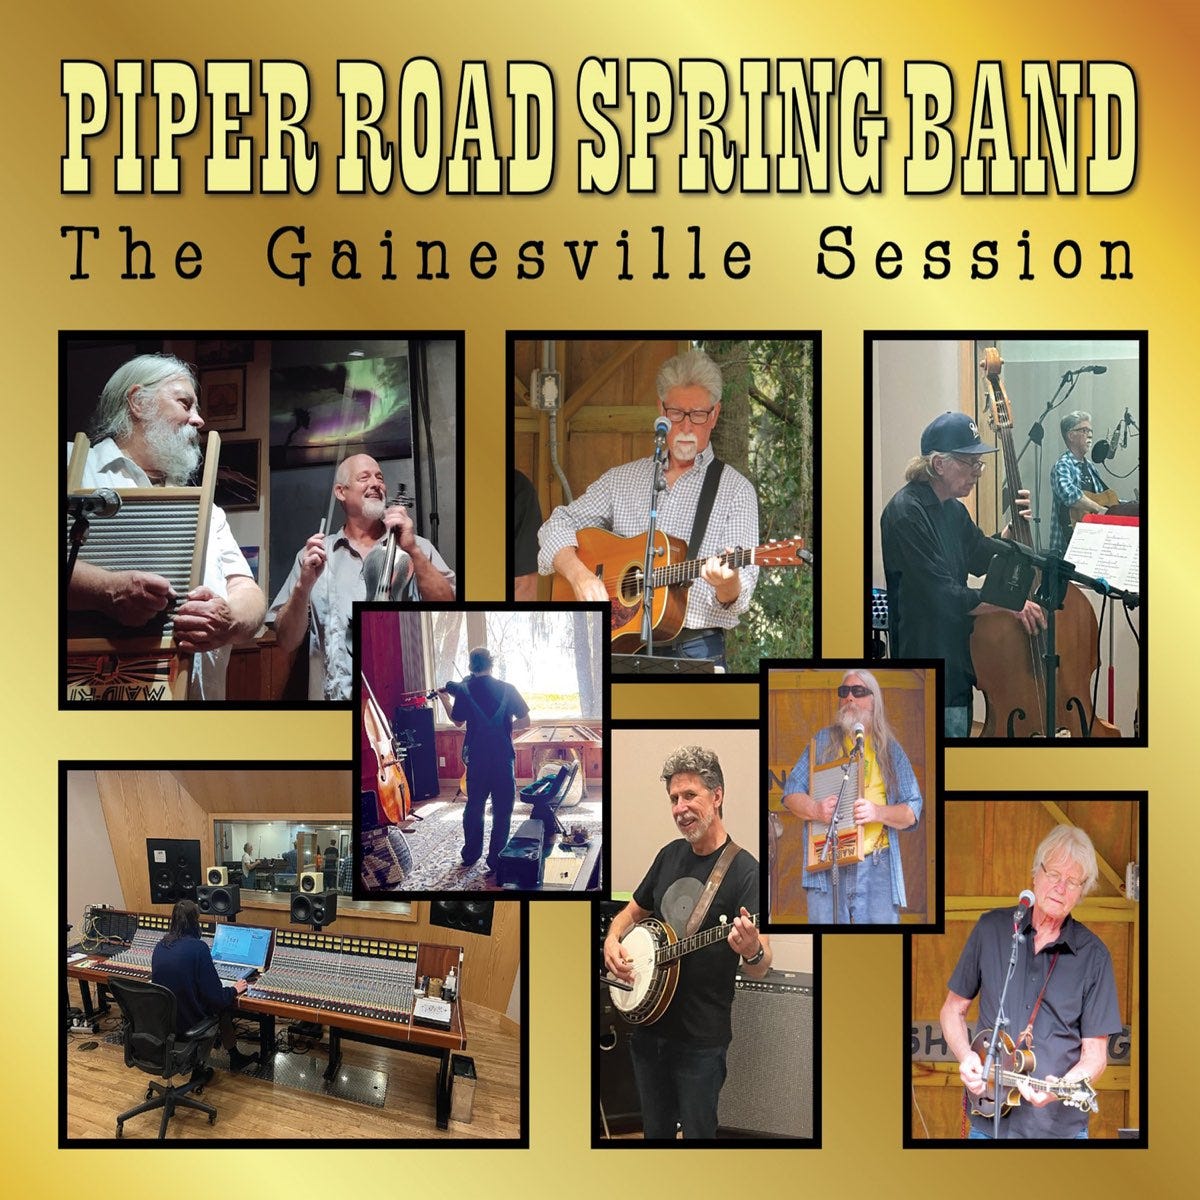 The Gainesville Session - Album by Piper Road Spring Band - Apple Music